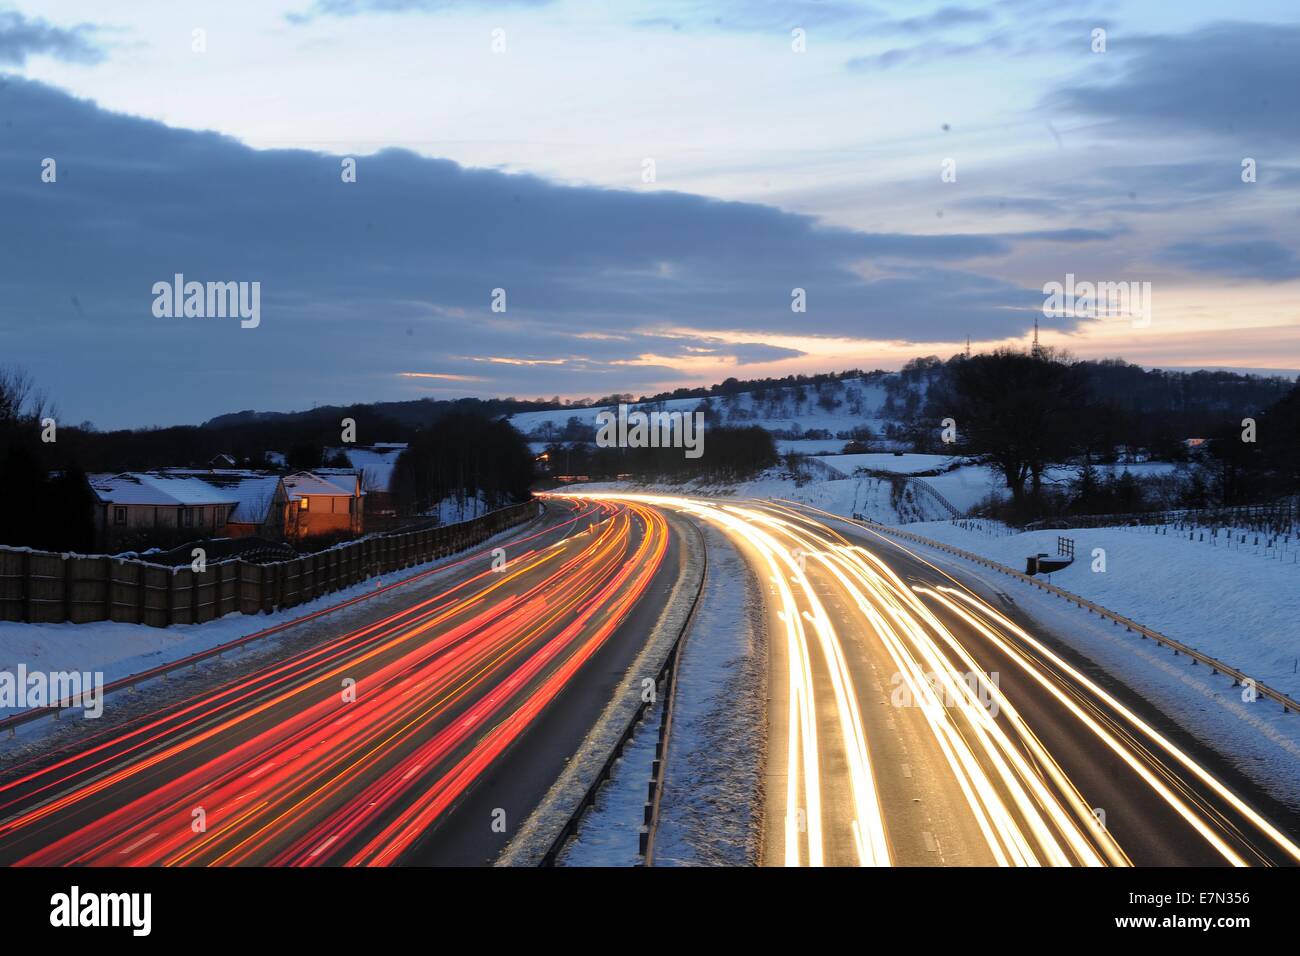 Heavy motorway traffic at rush hour at night on the M4 in the UK following snow fall. Stock Photo